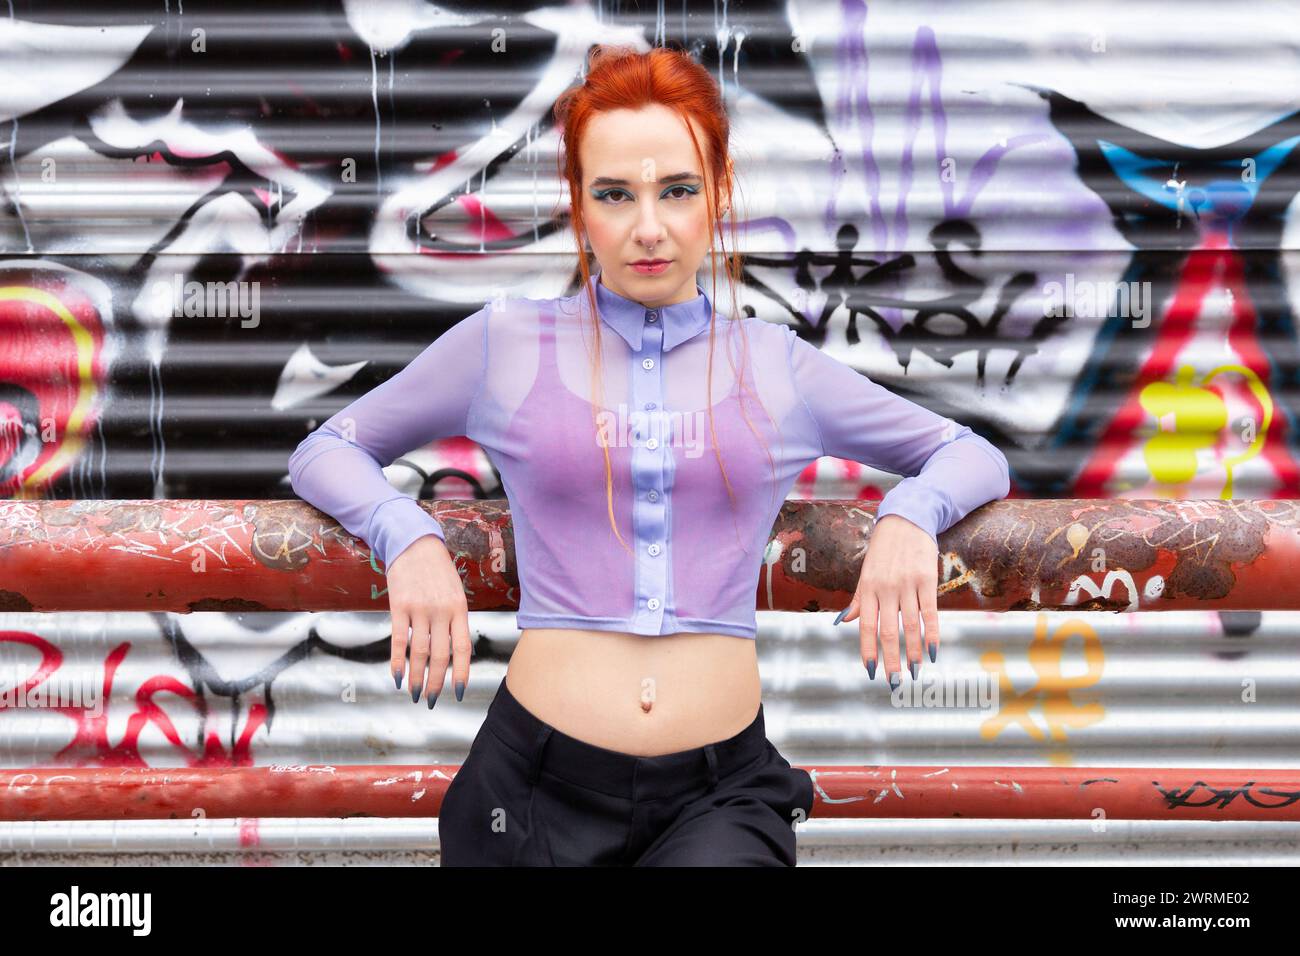 A Caucasian female poses against an edgy backdrop of colorful graffiti. Her striking red hair contrasts with her sheer lilac blouse and black slacks l Stock Photo